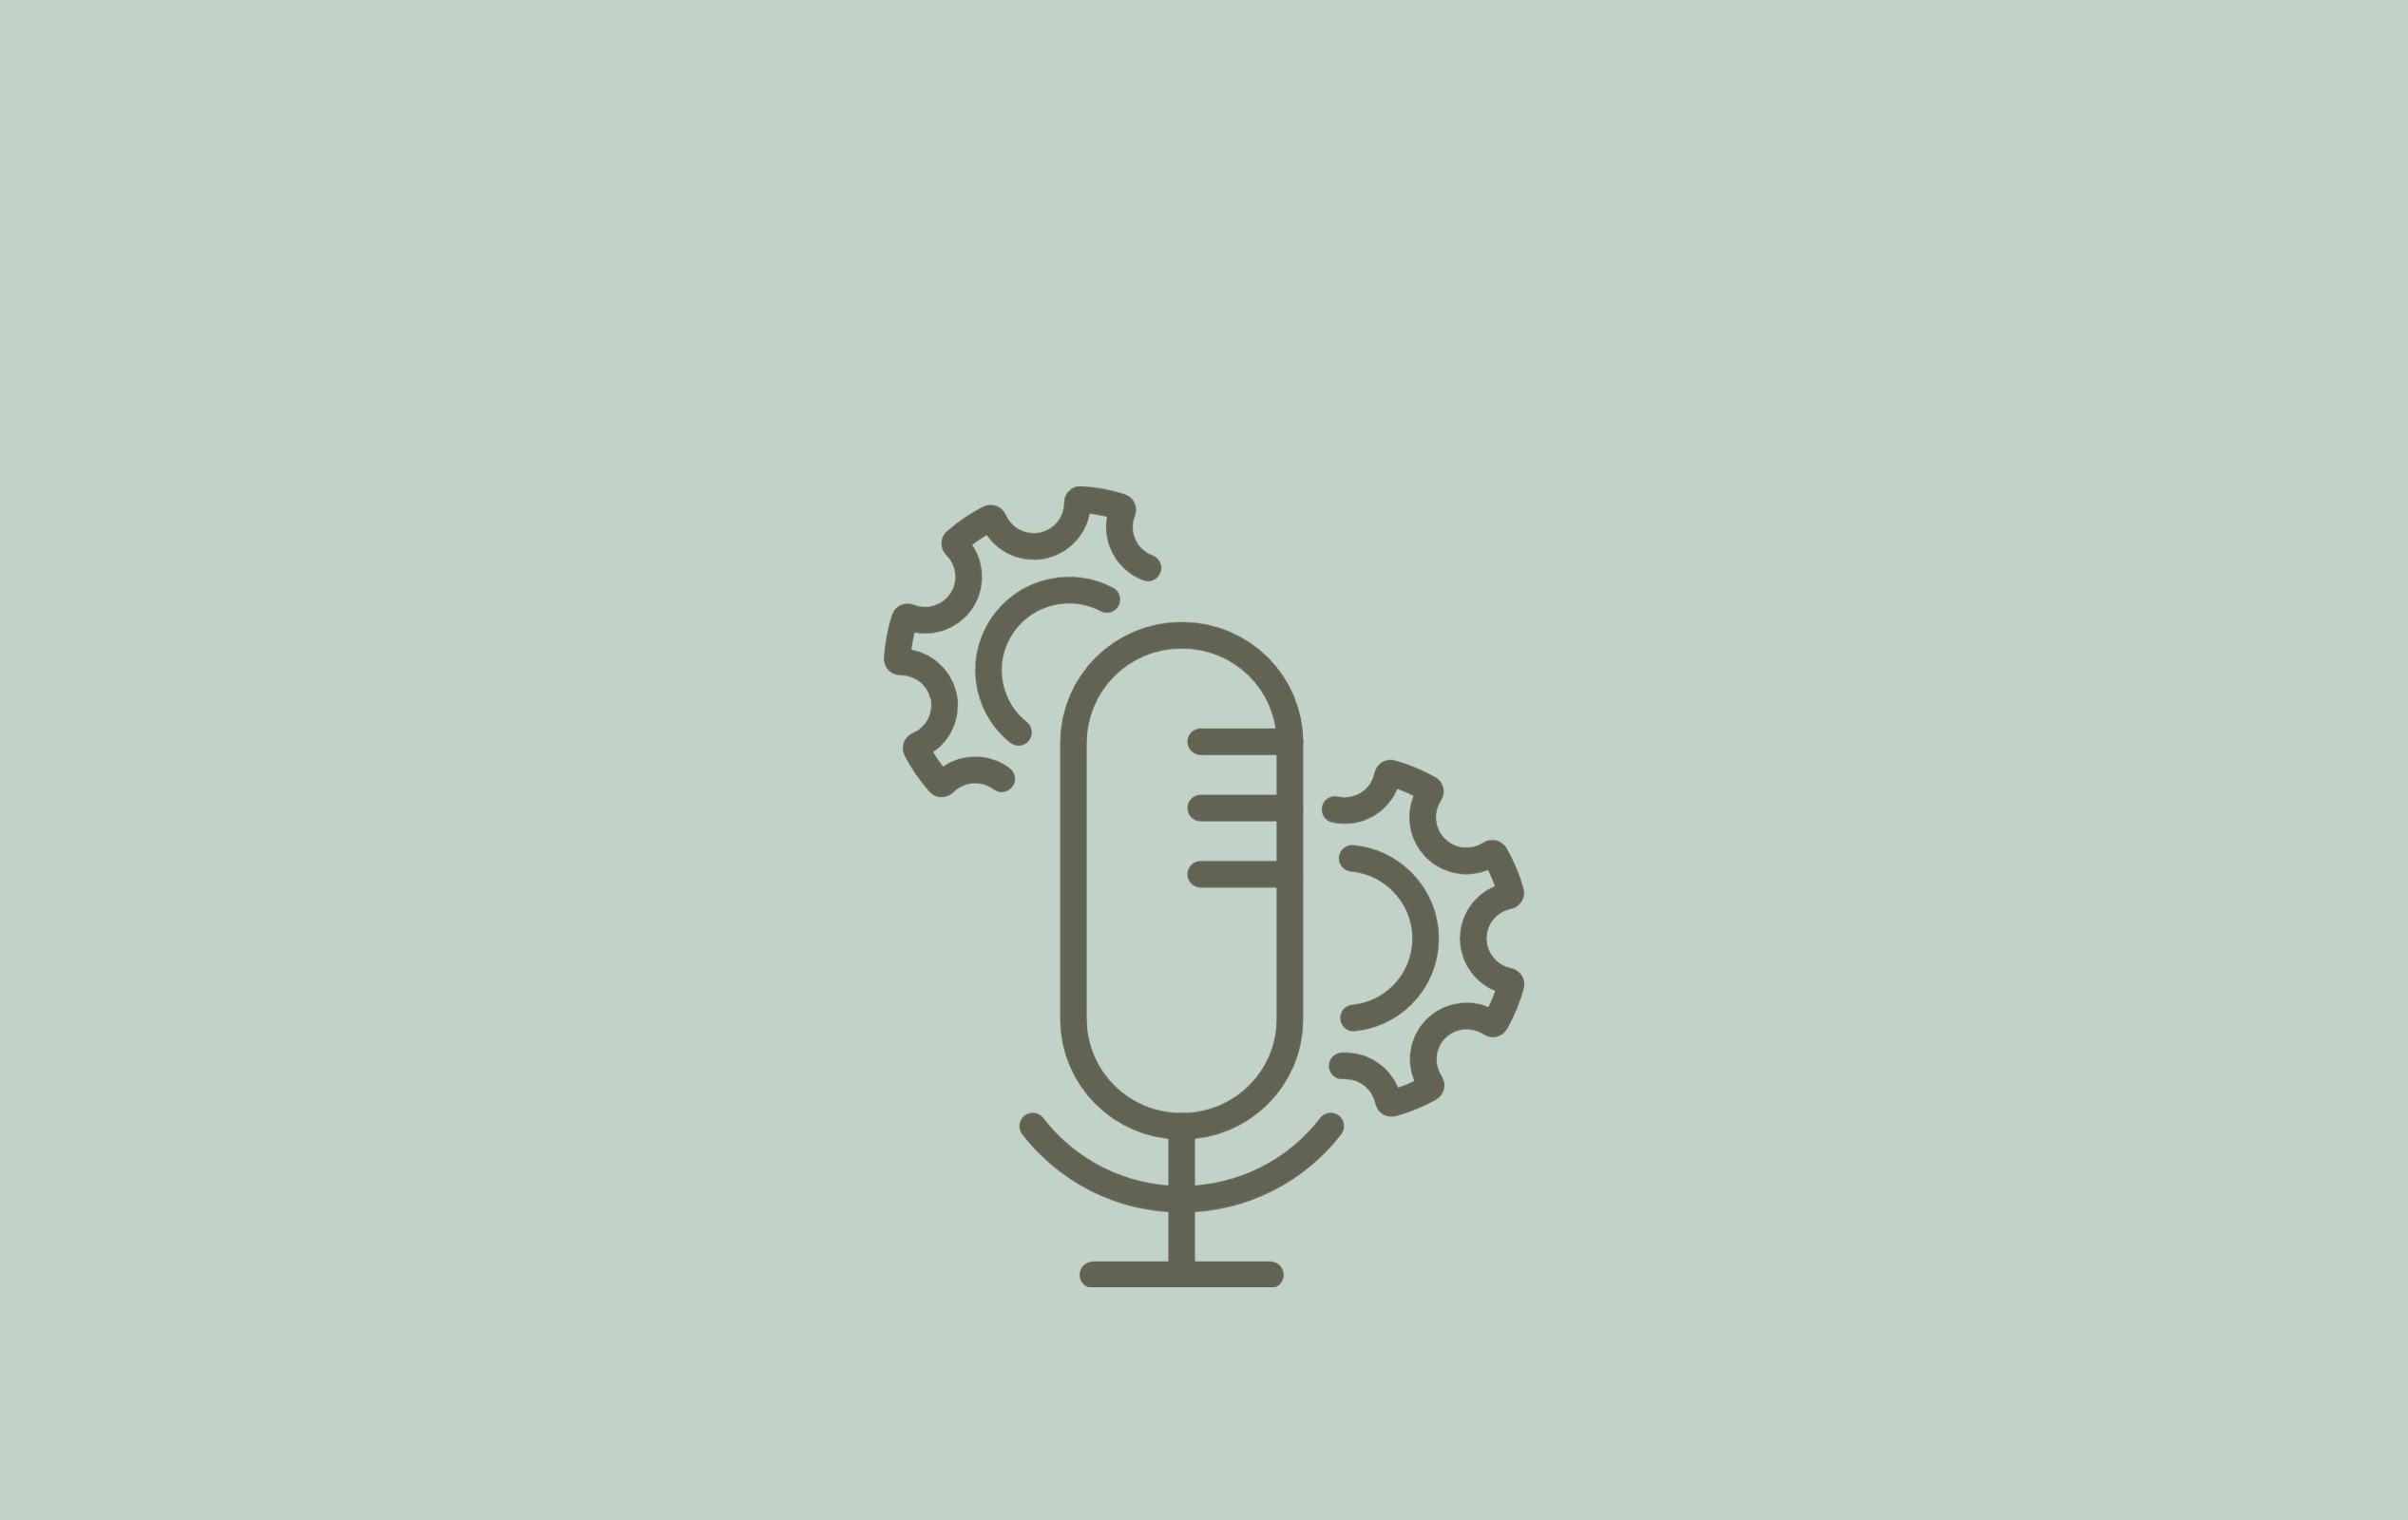 Microphone with gears representing podcasting and processes